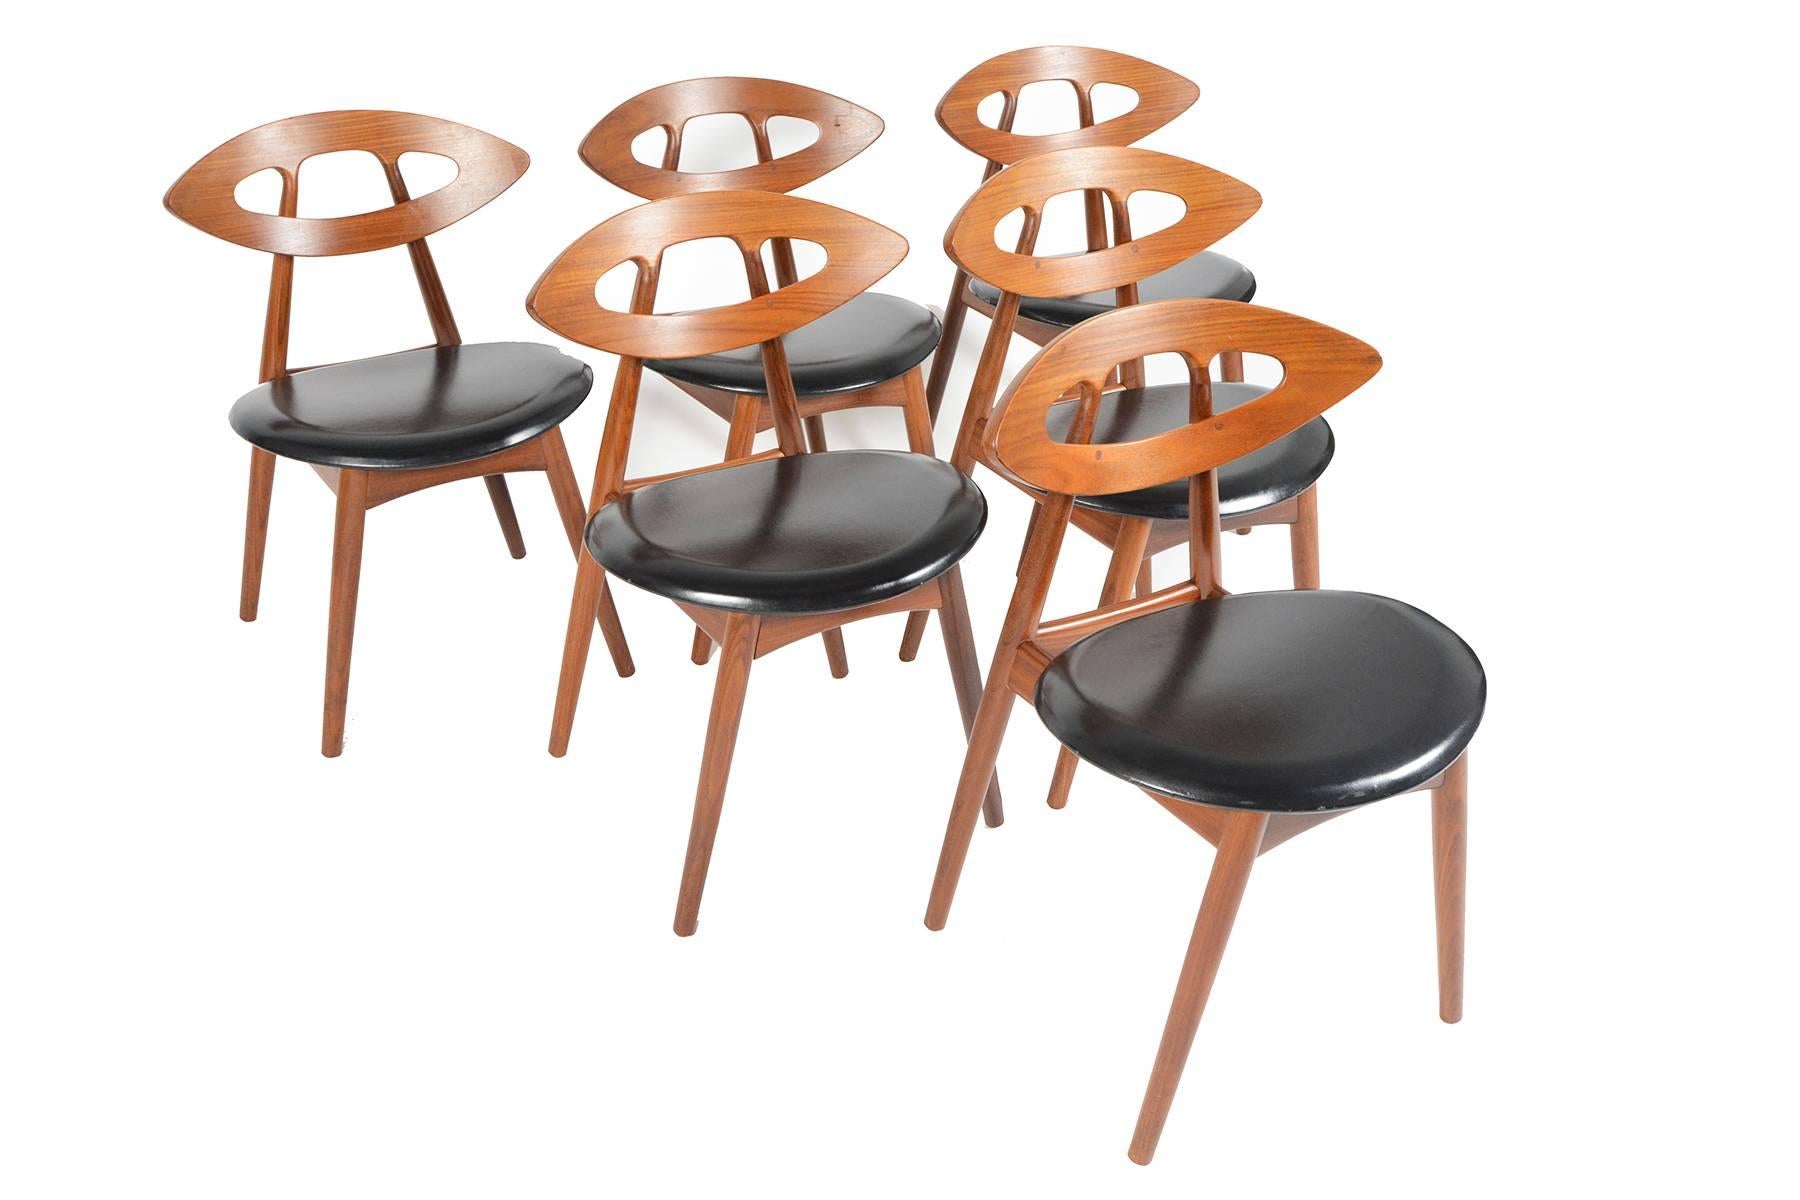 This magnificent set of six Danish modern dining chairs was designed by Ejvind A. Johansson for Ivan Gern Møbelfabrik in 1961. This Model 84 is more commonly known as the 